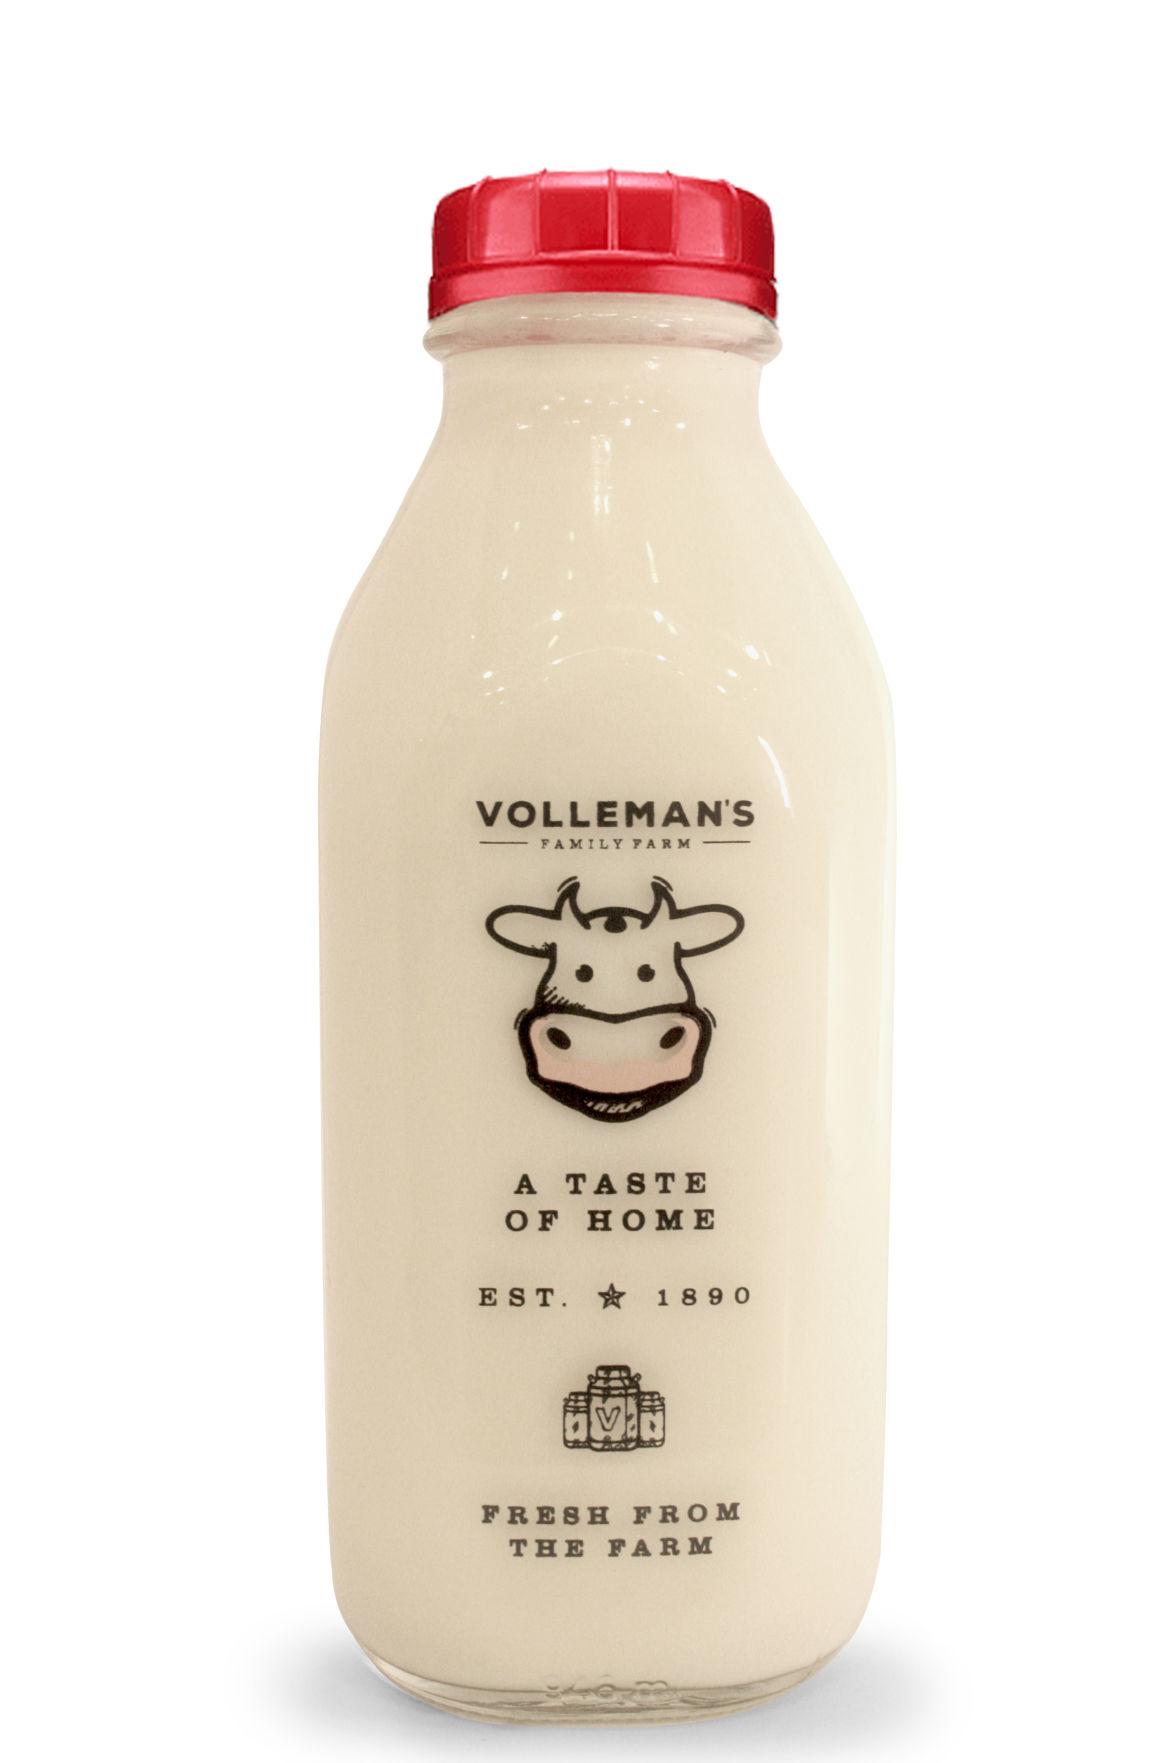 Volleman's Family Farm - Milk in glass bottles from a local Texan